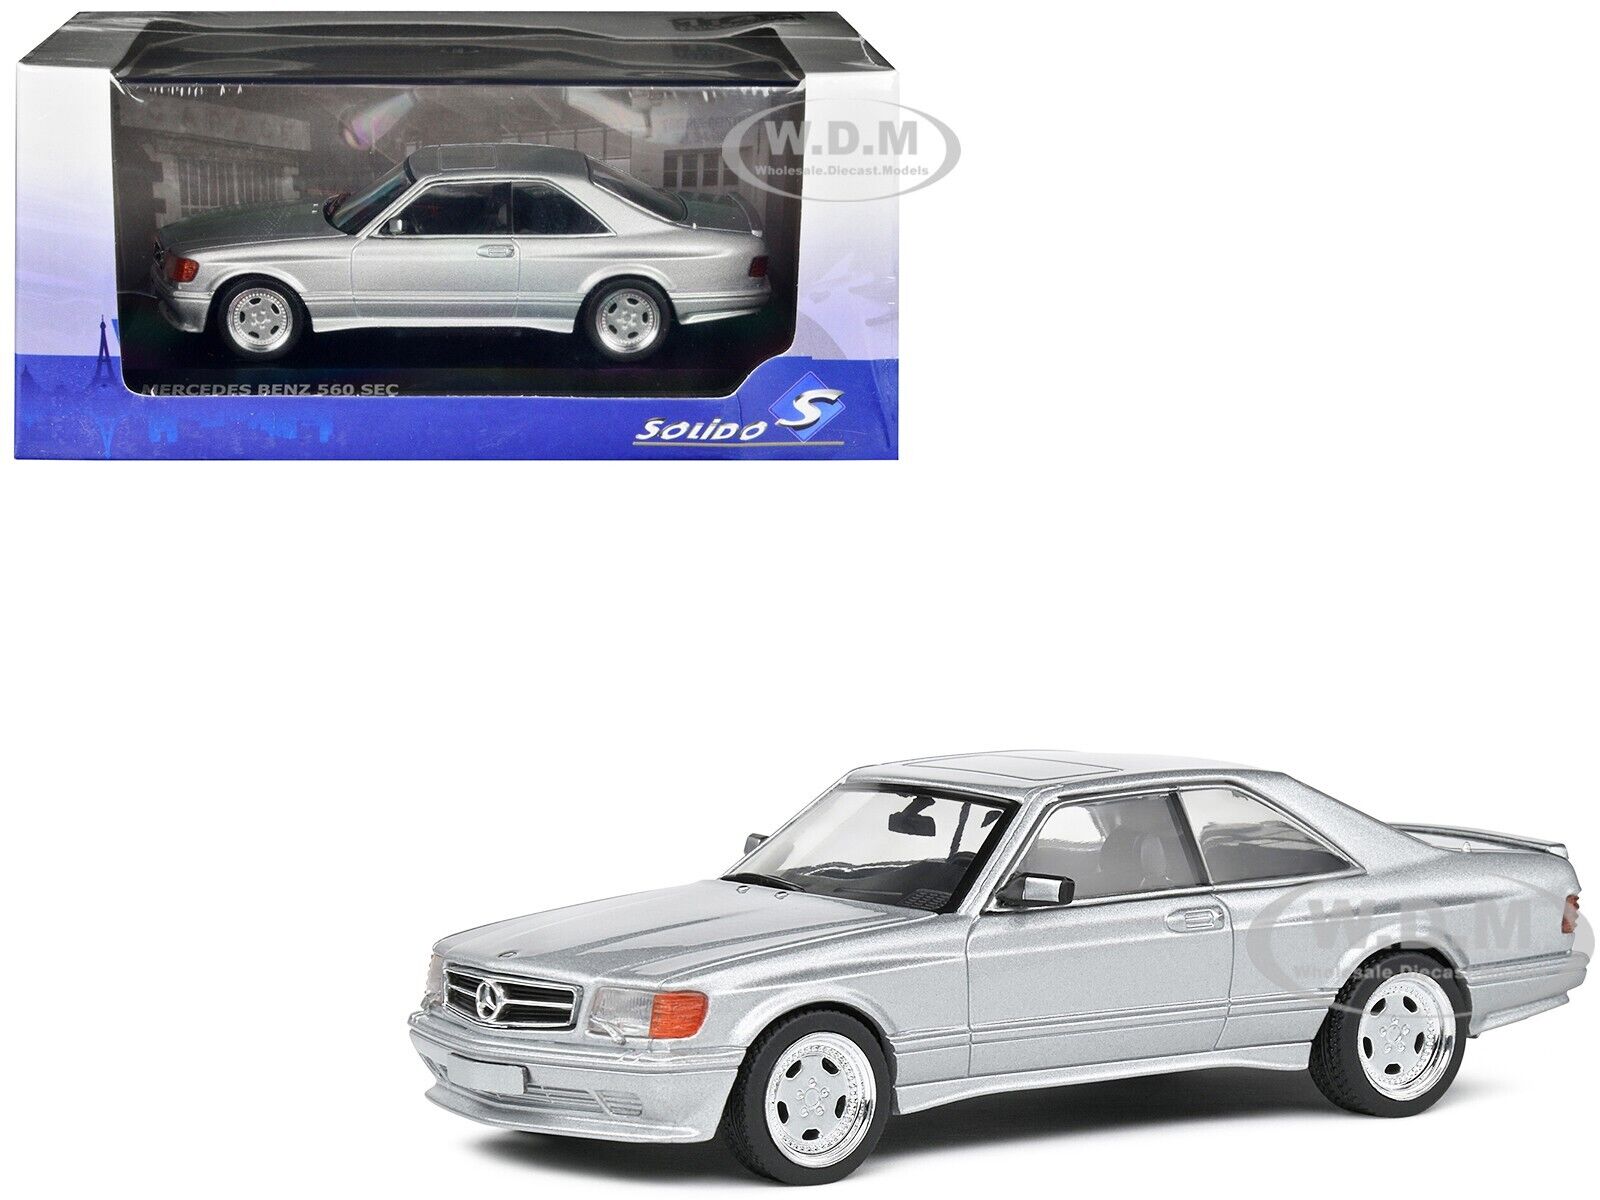 1990 MERCEDES-BENZ 560 SEC AMG WIDEBODY SILVER 1/43 DIECAST BY SOLIDO S4310903